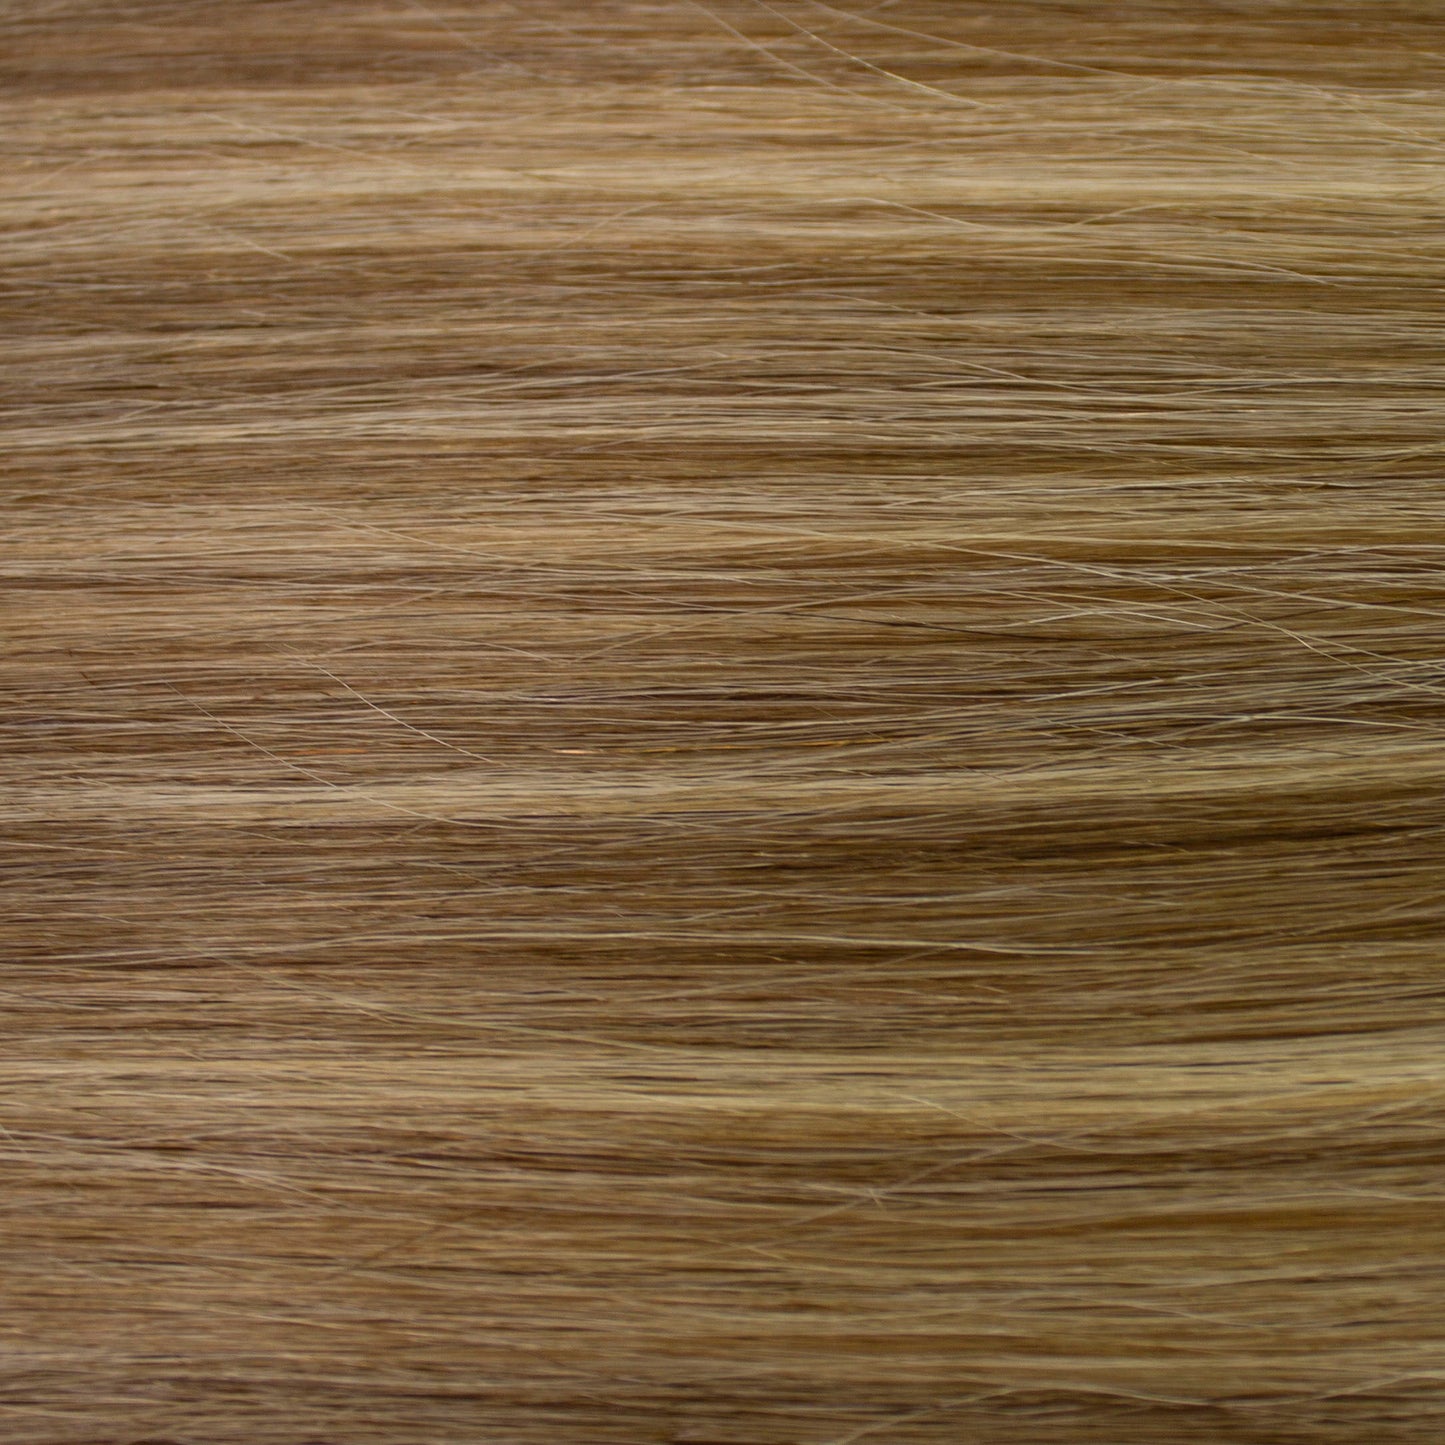 Chloe Collection - Thin weft 14" #7/22 - 60g